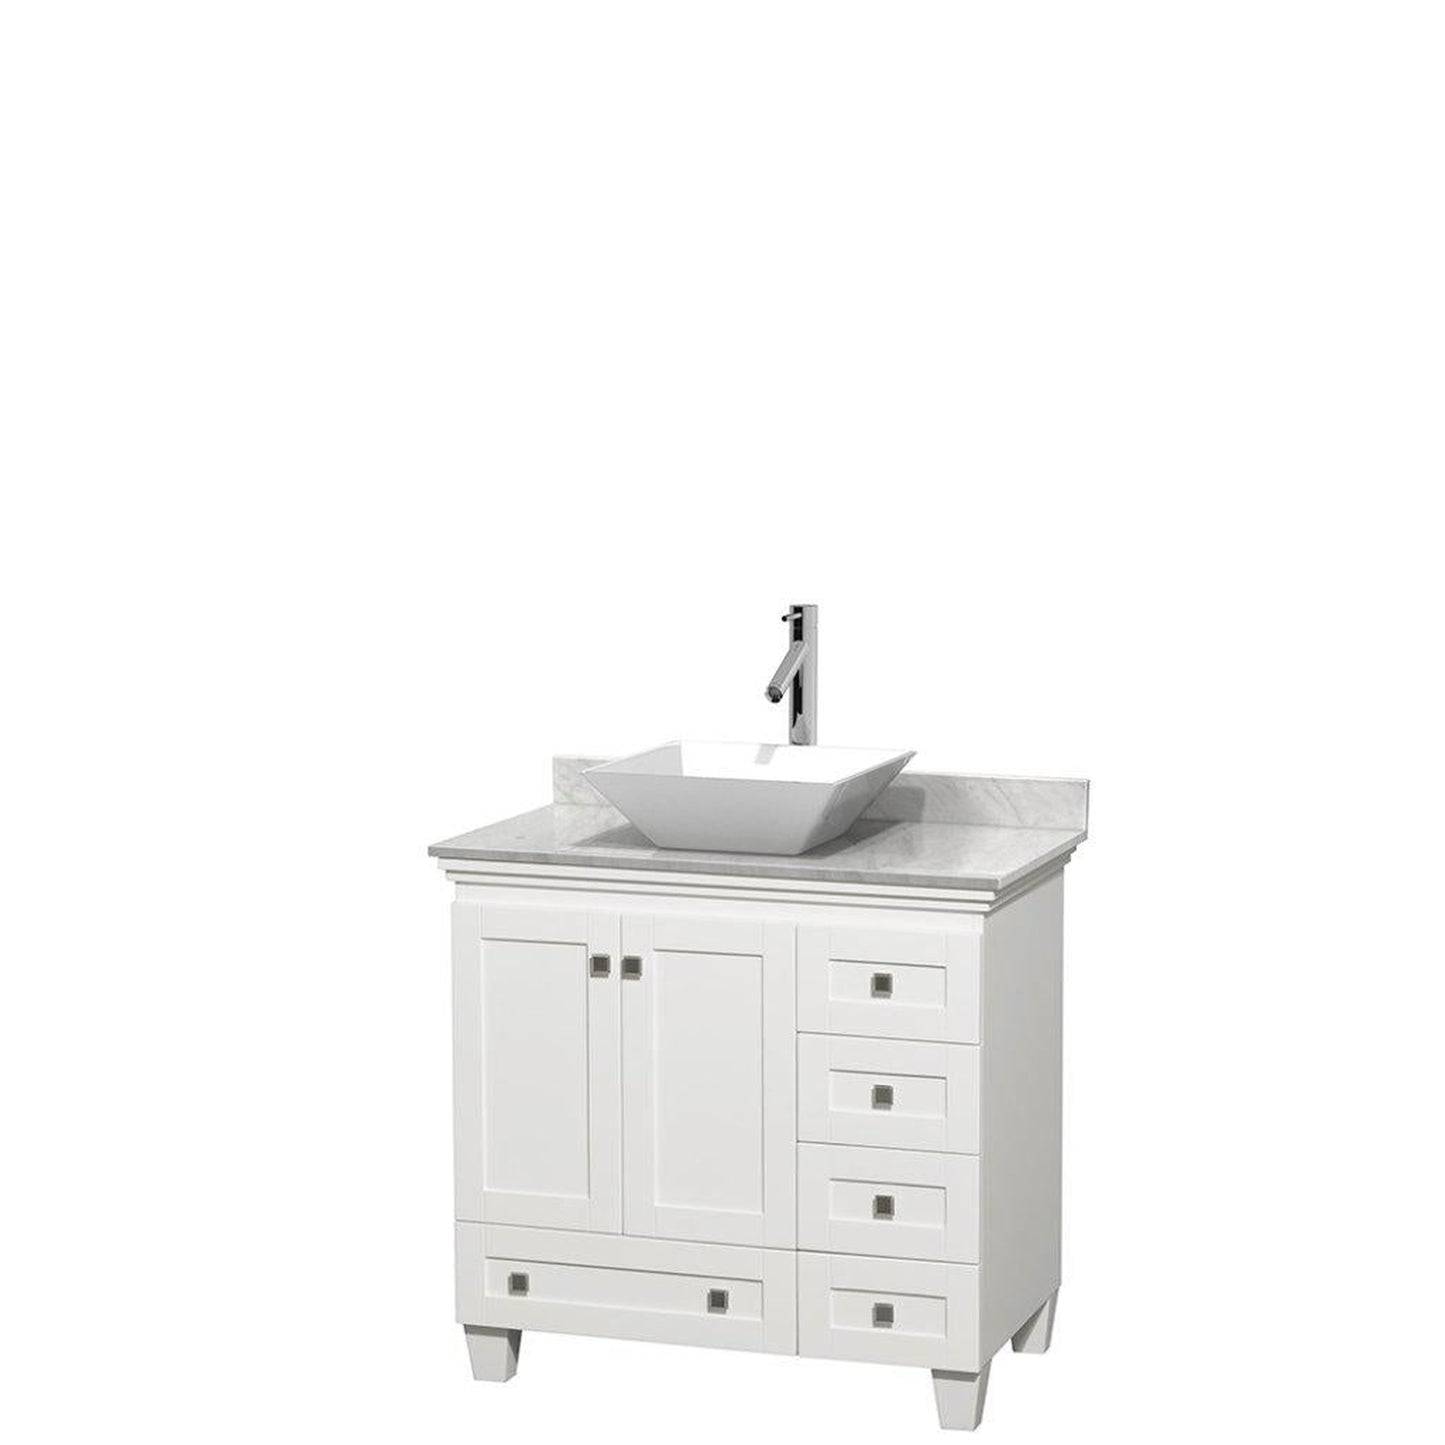 Wyndham Collection Acclaim 36" Single Bathroom White Vanity With White Carrara Marble Countertop And Pyra White Porcelain Sink